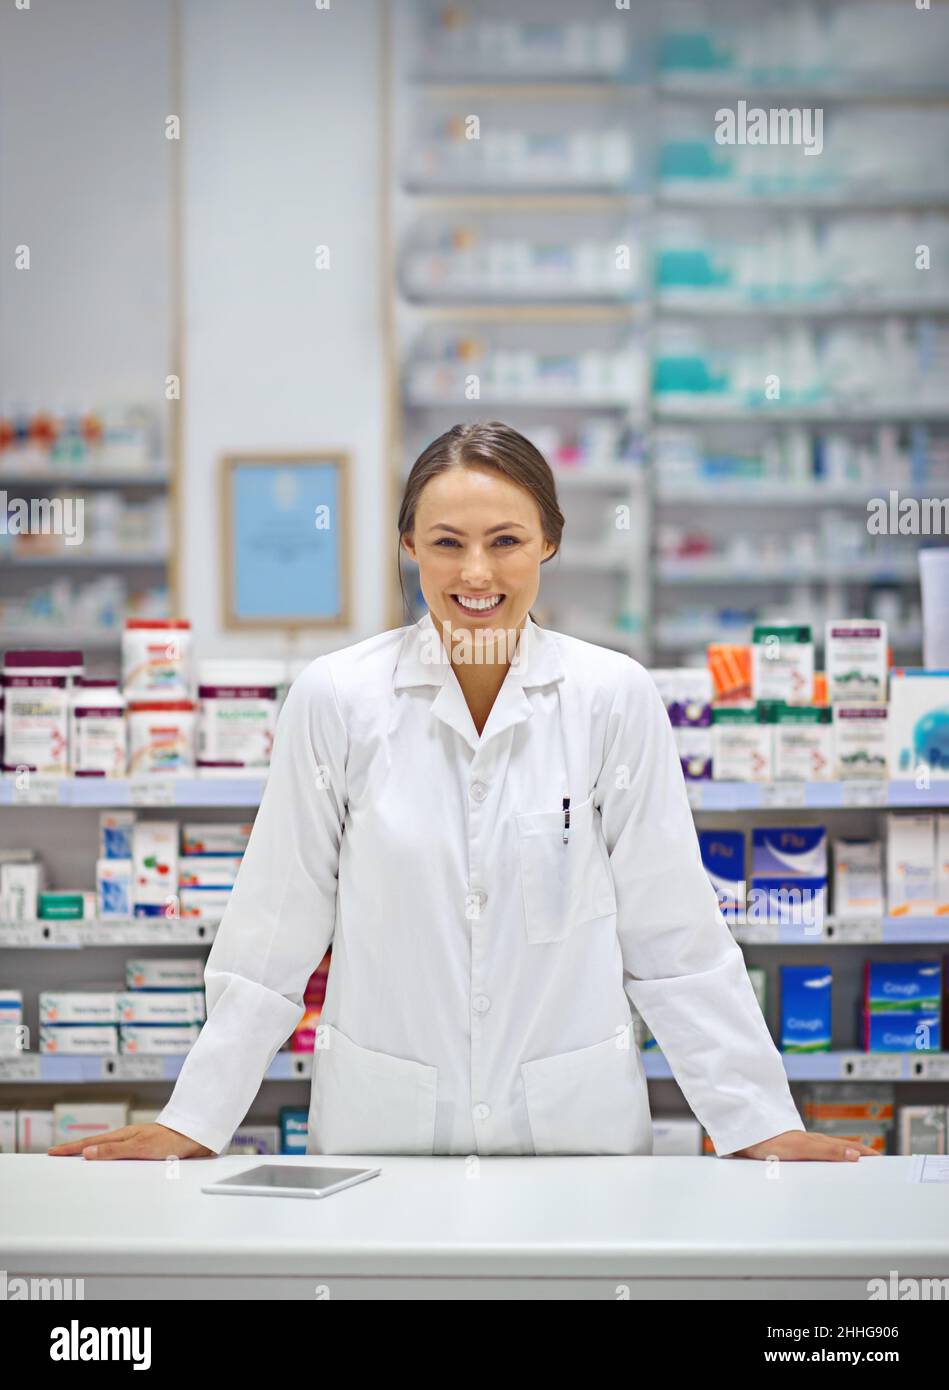 Providing prescriptions and a smile. Portrait of an attractive young pharmacist standing at the prescription counter. Stock Photo